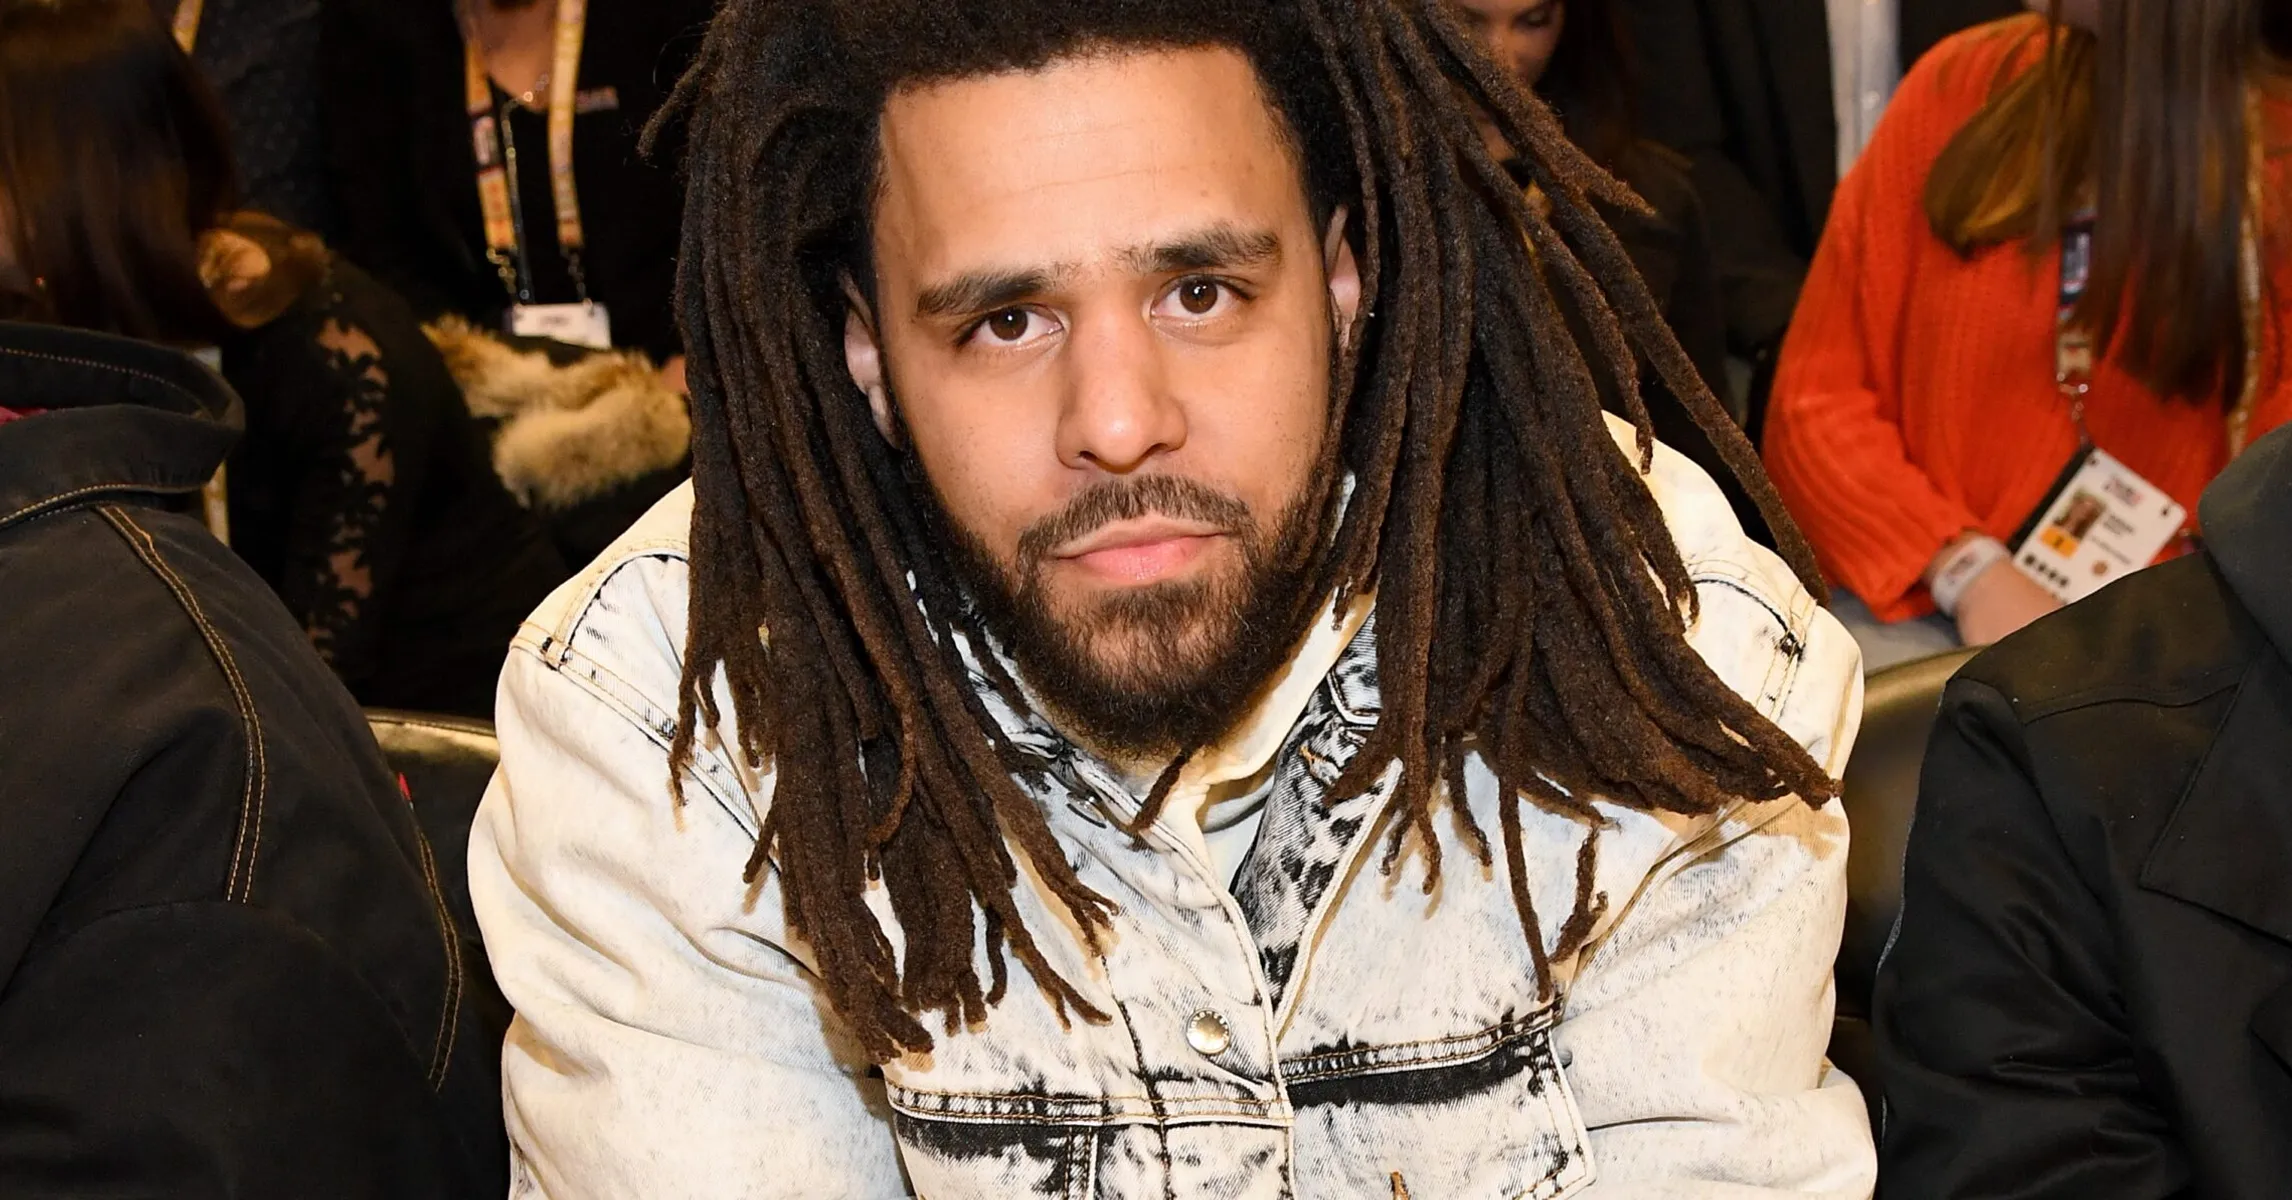 J Cole Pauses NYC Bike Ride To Take Photos With Fans